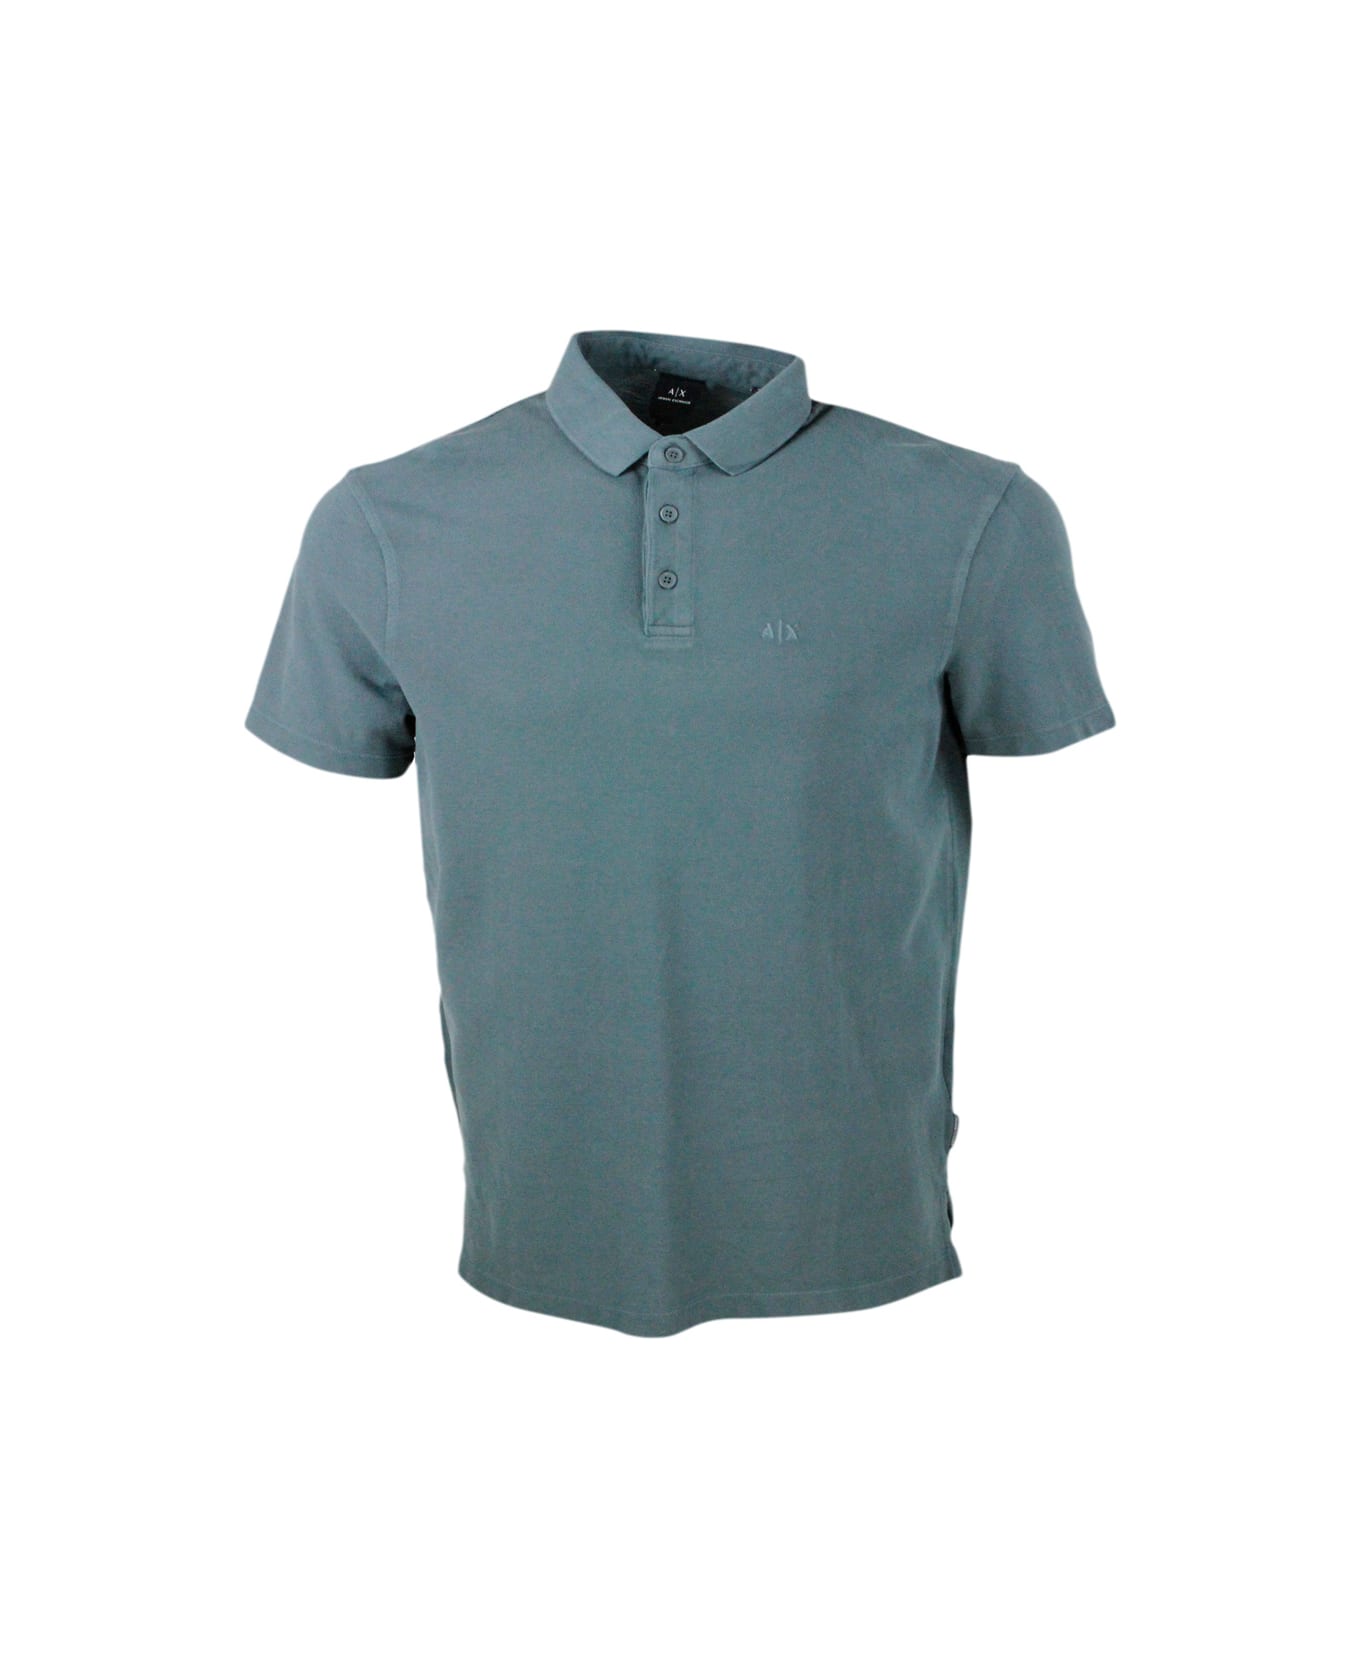 Armani Collezioni 3-button Short-sleeved Pique Cotton Polo Shirt With Logo Embroidered On The Chest - Green